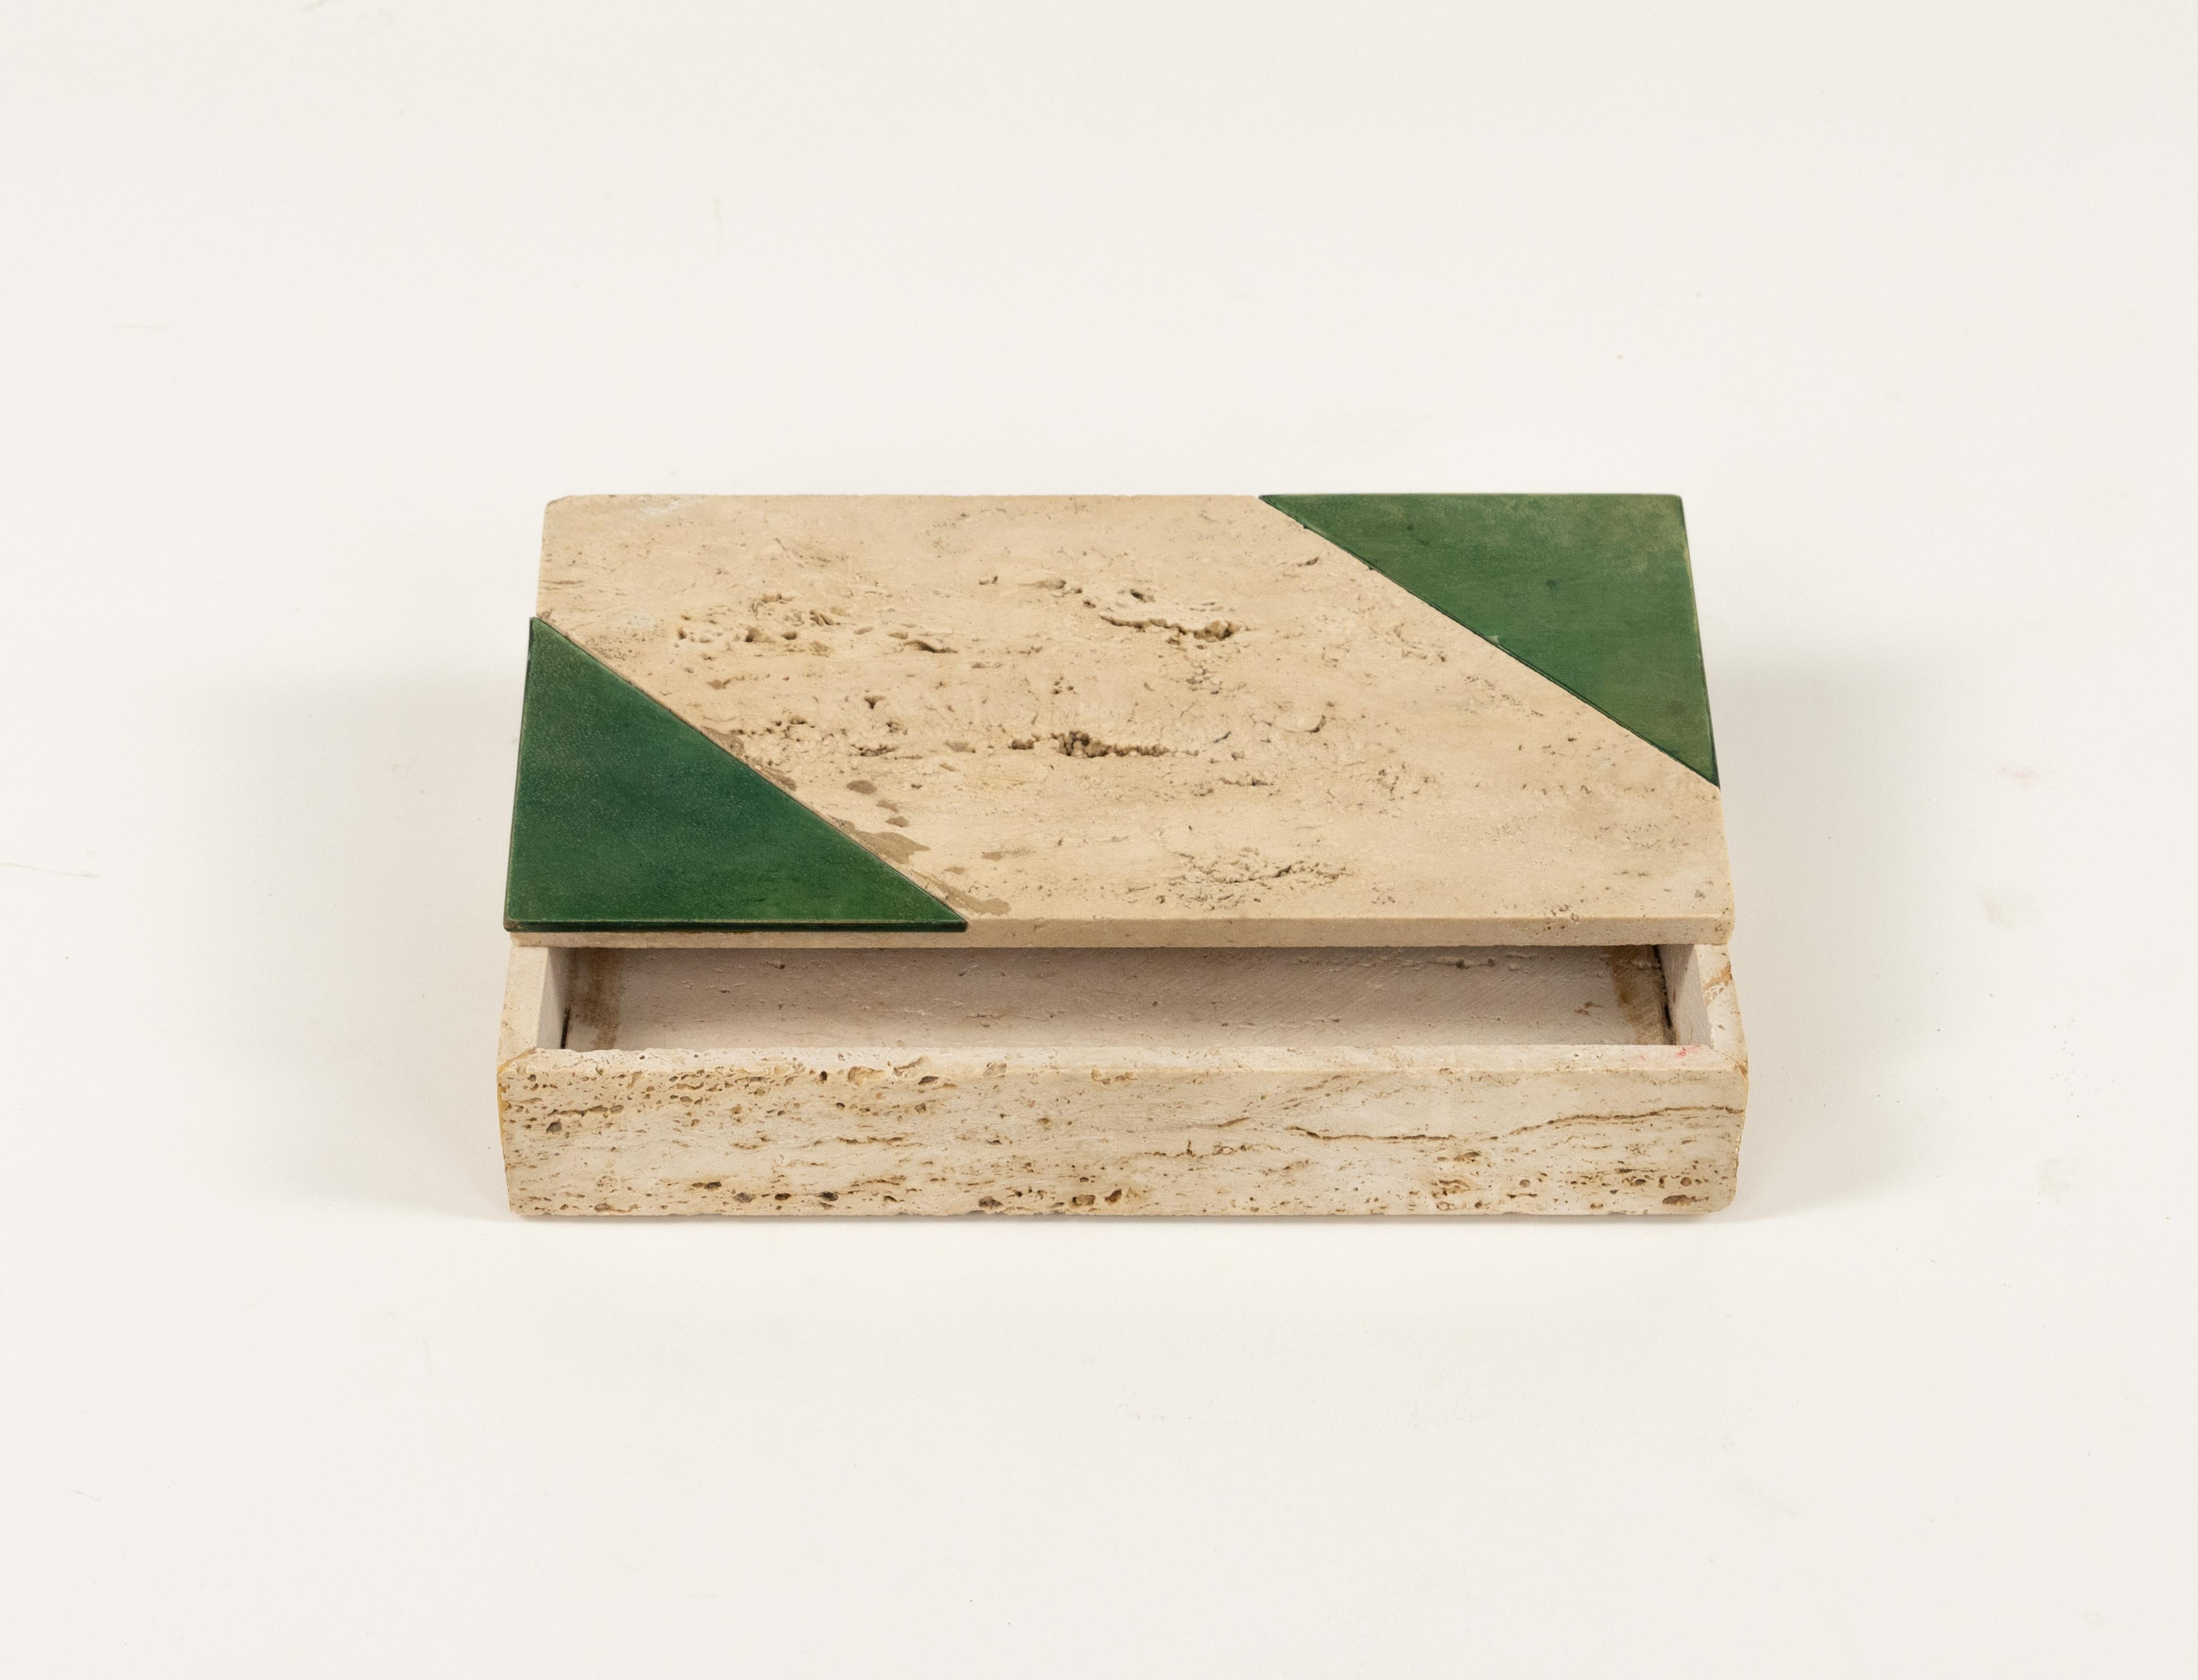 Rectangular Decorative Box in Travertine Fratelli Mannelli Style, Italy 1970s For Sale 7